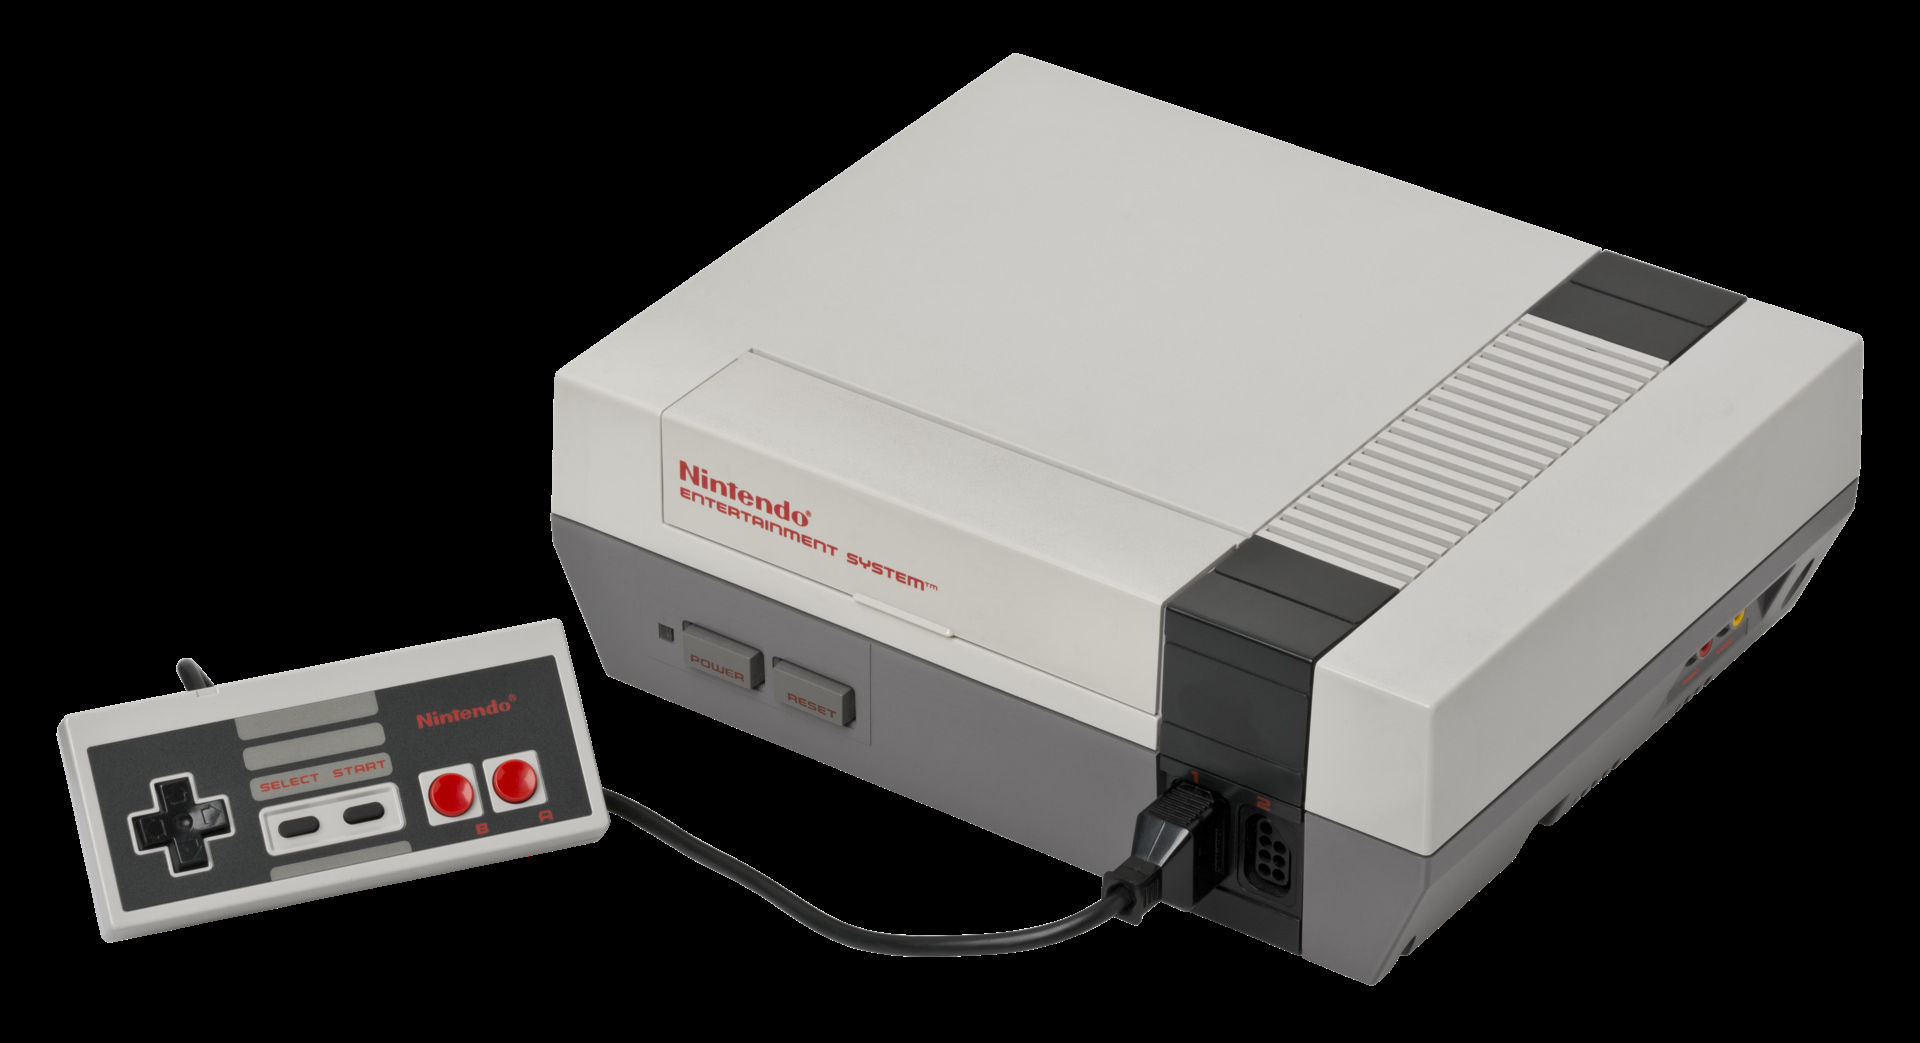 NES console with controller image